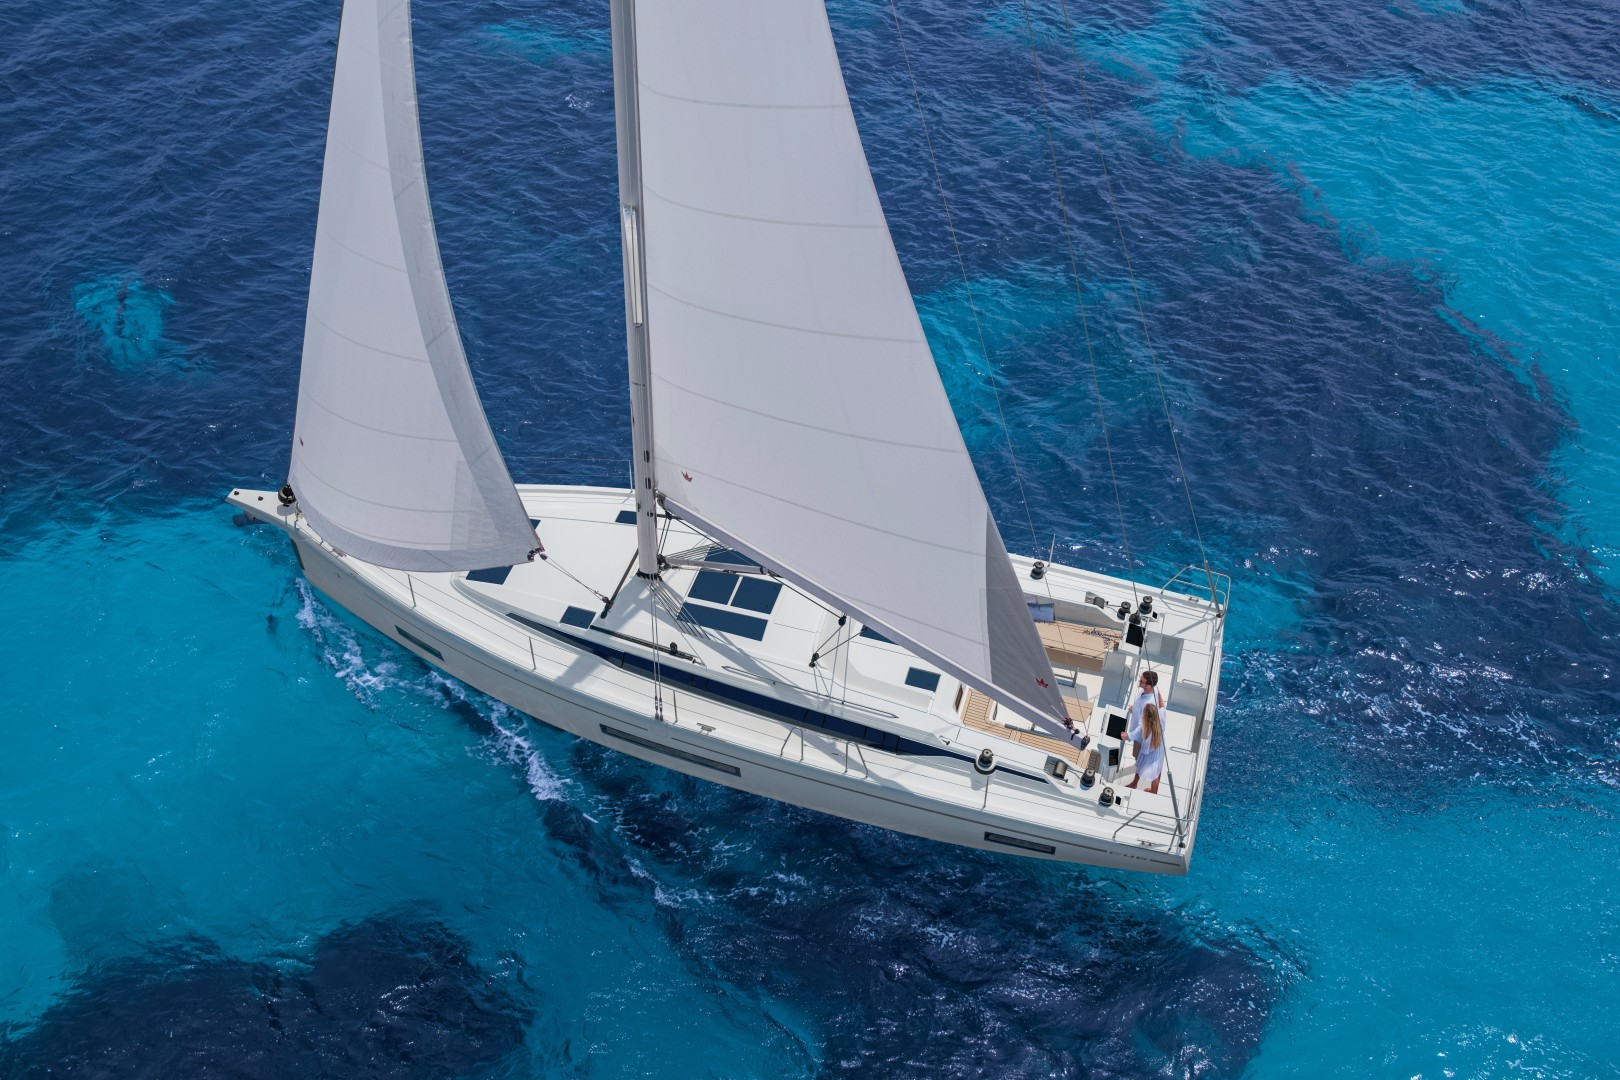 Cossutti designed Bavaria C46 is an outstanding performer